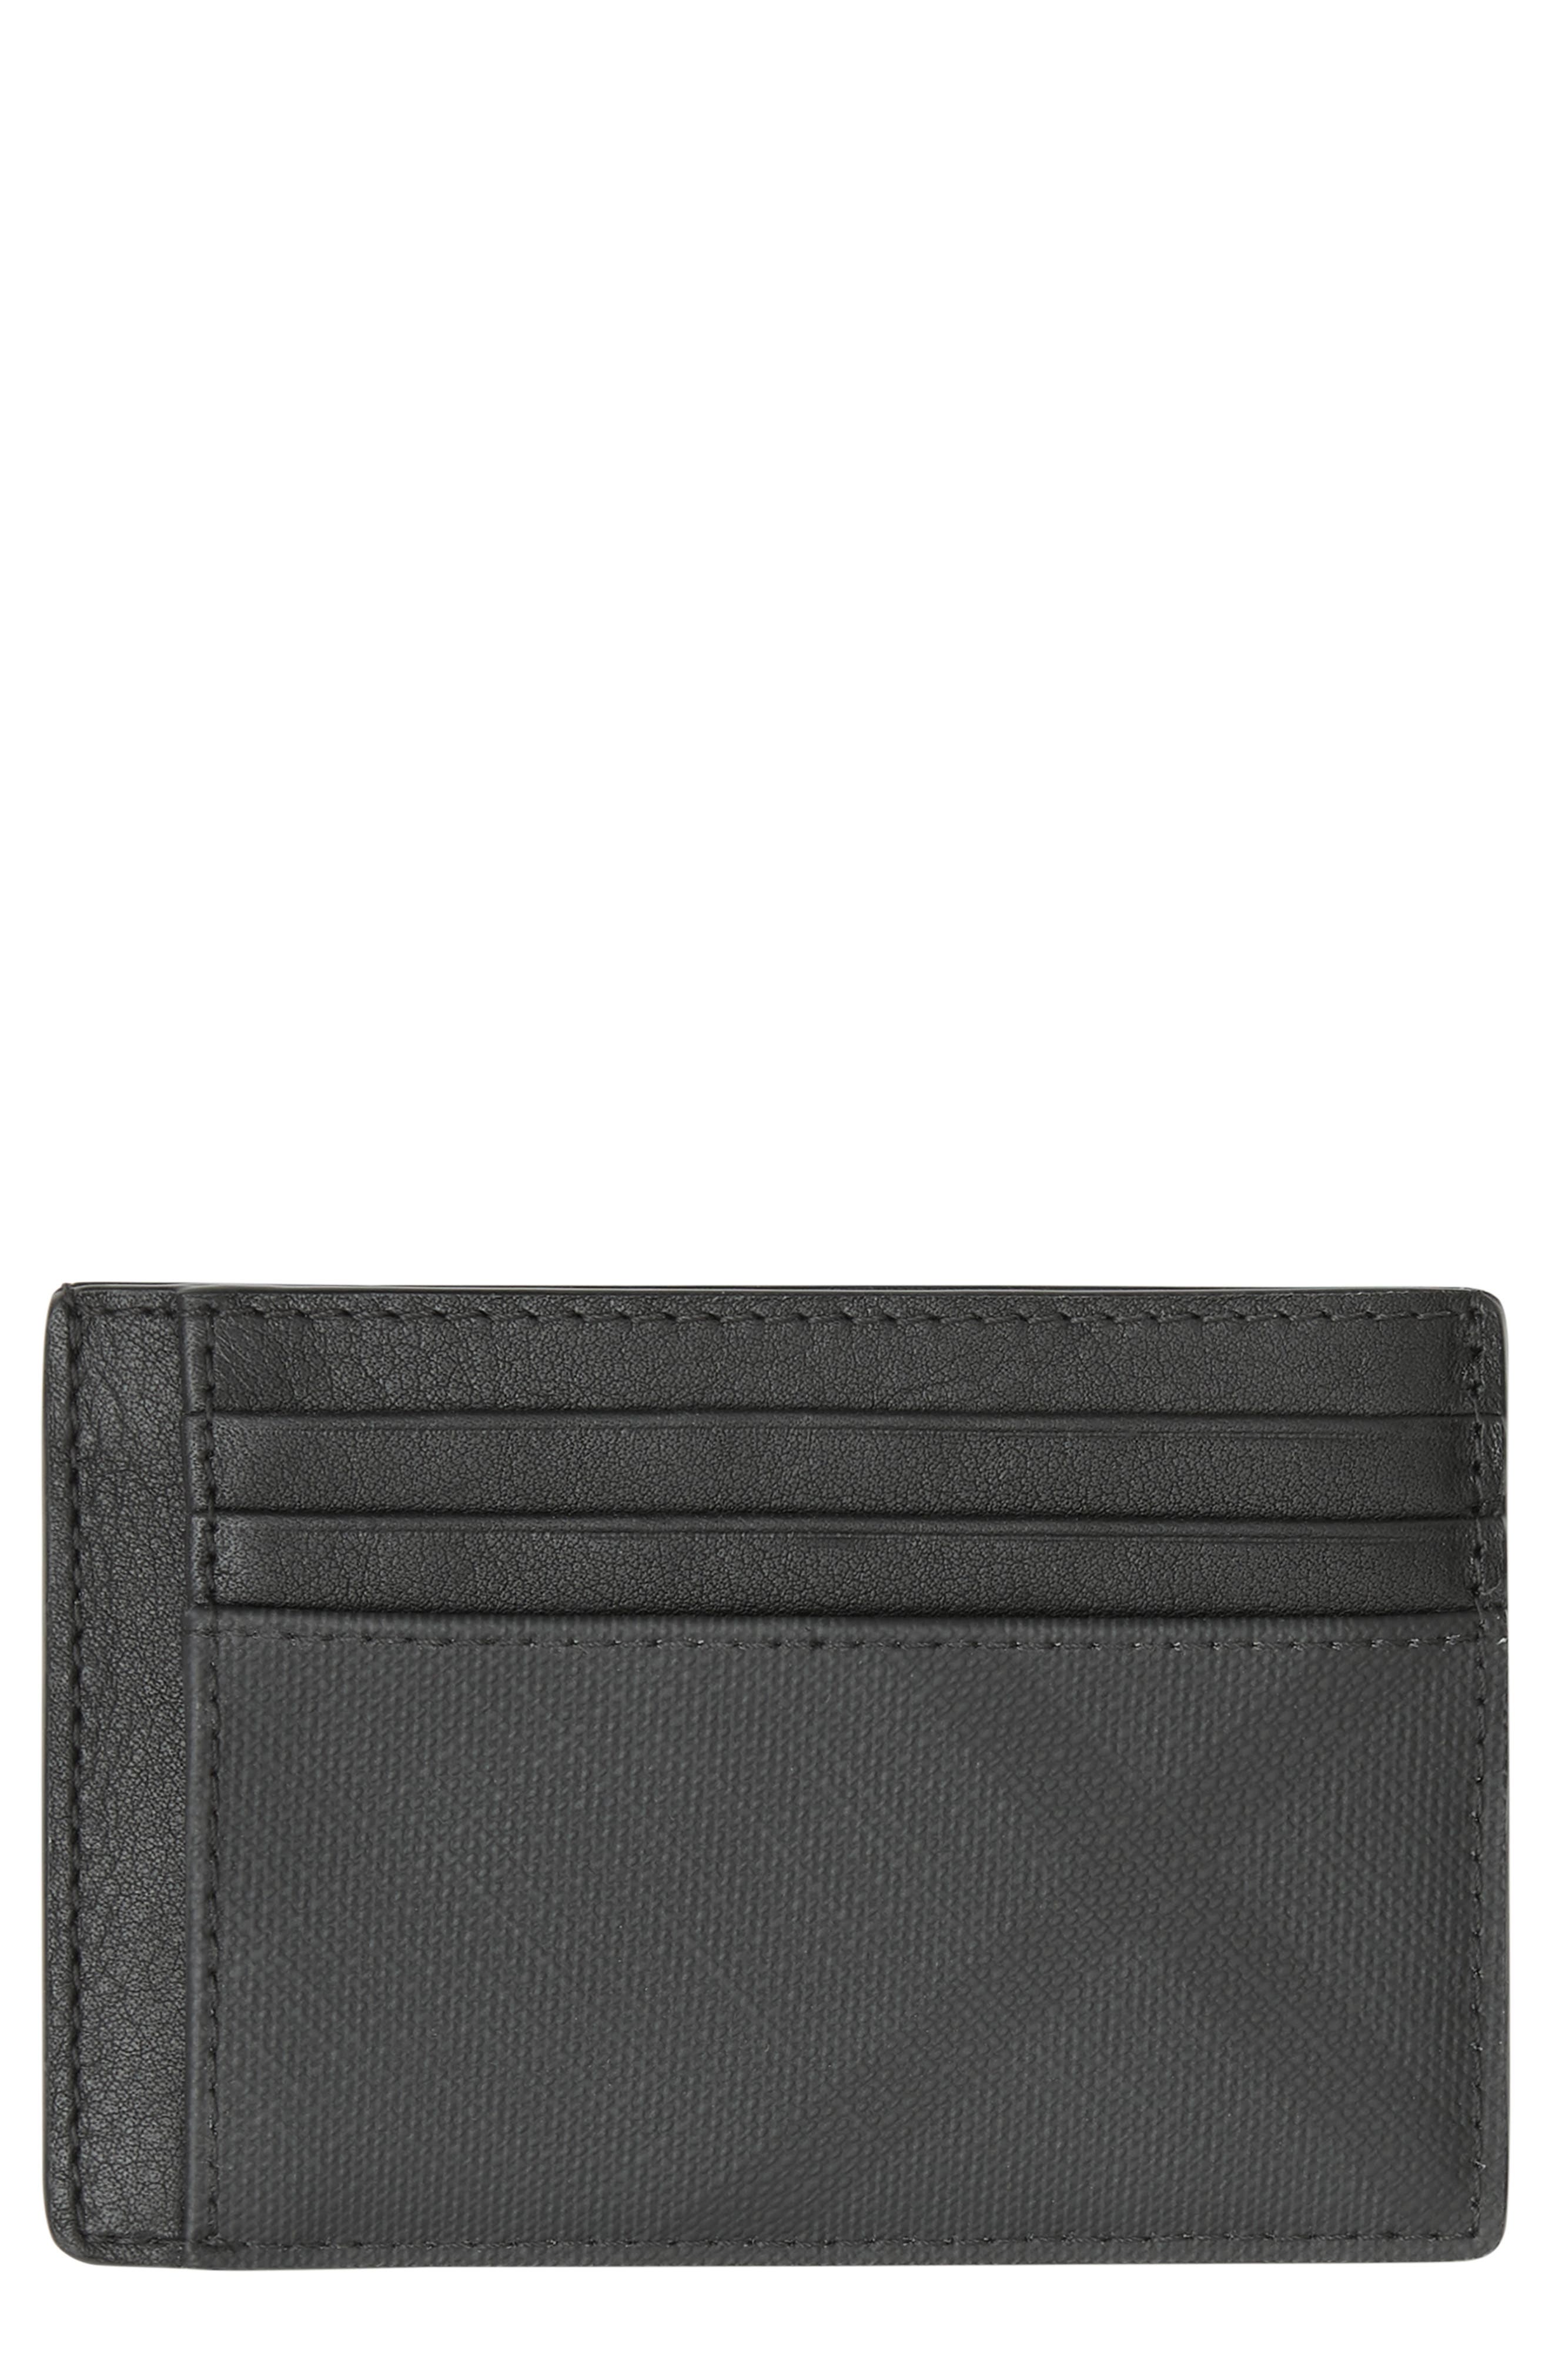 burberry men's wallet with coin pocket